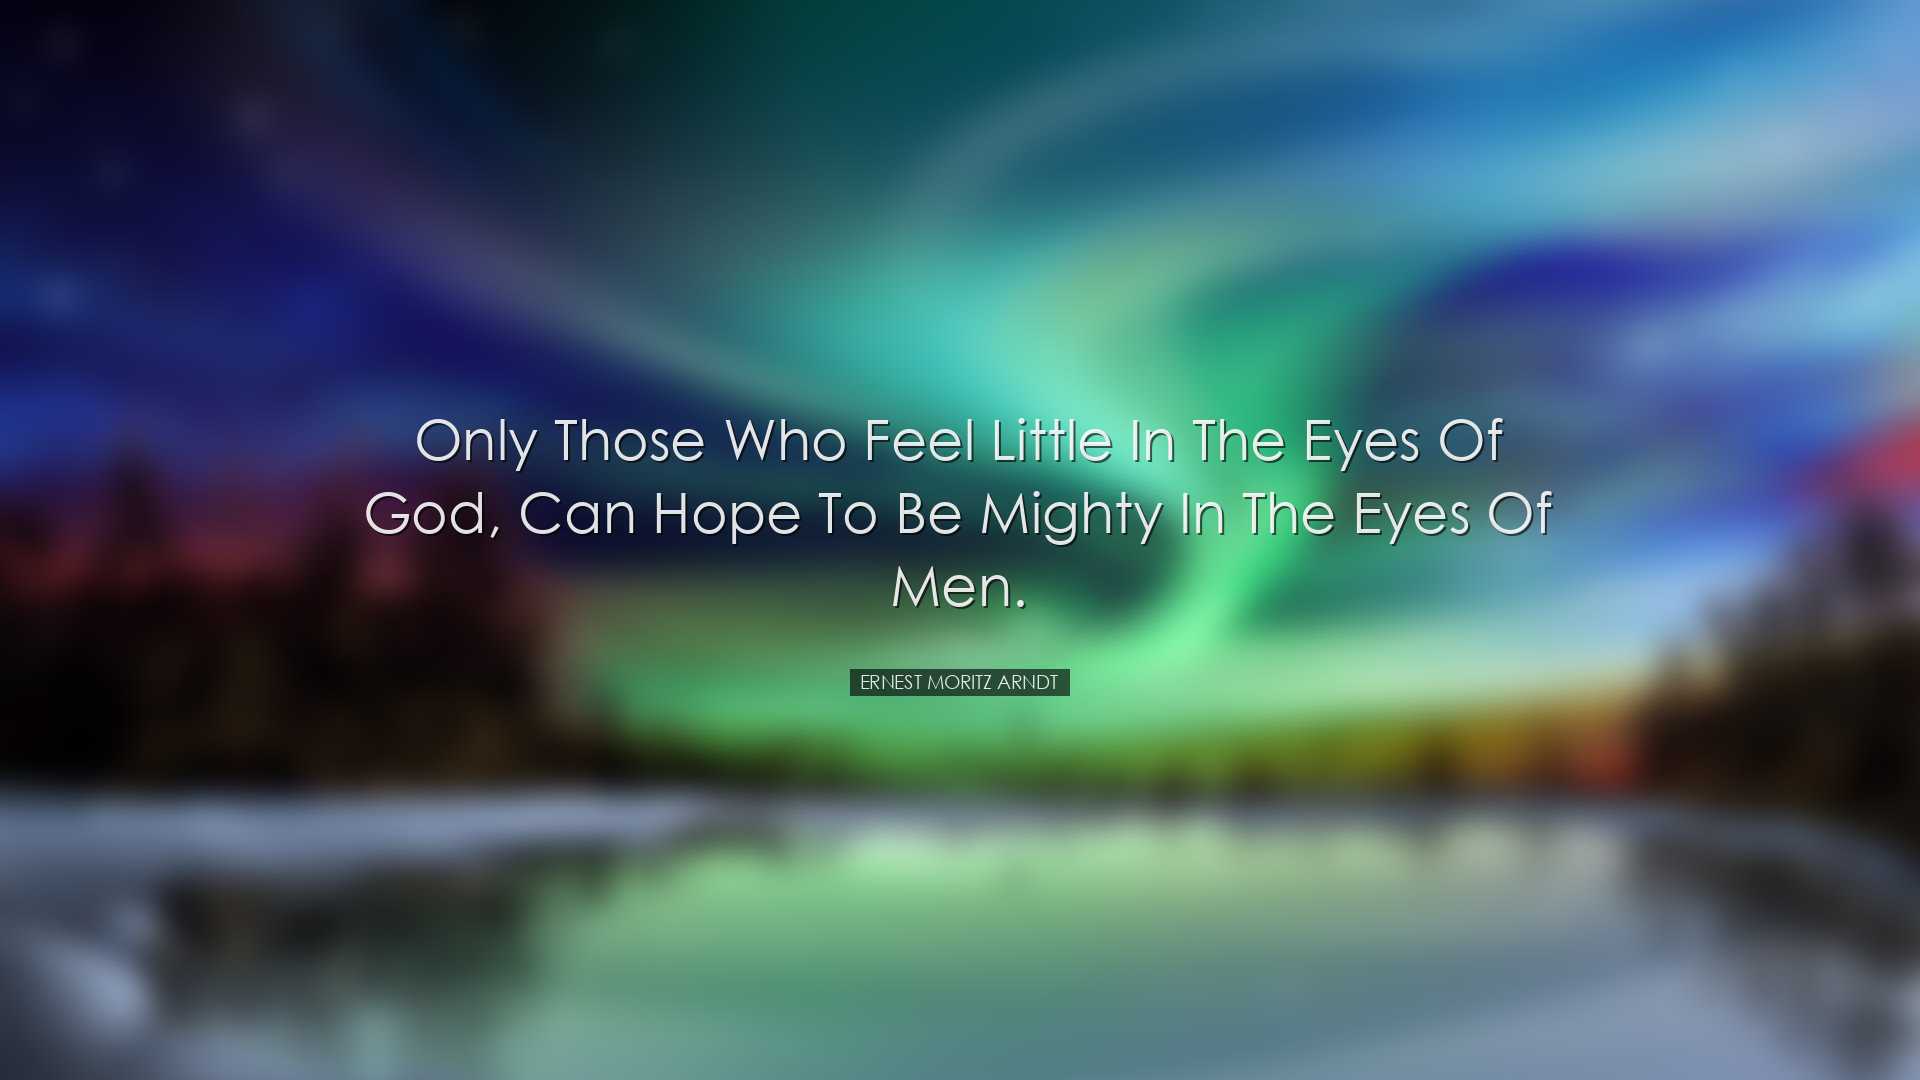 Only those who feel little in the eyes of God, can hope to be migh